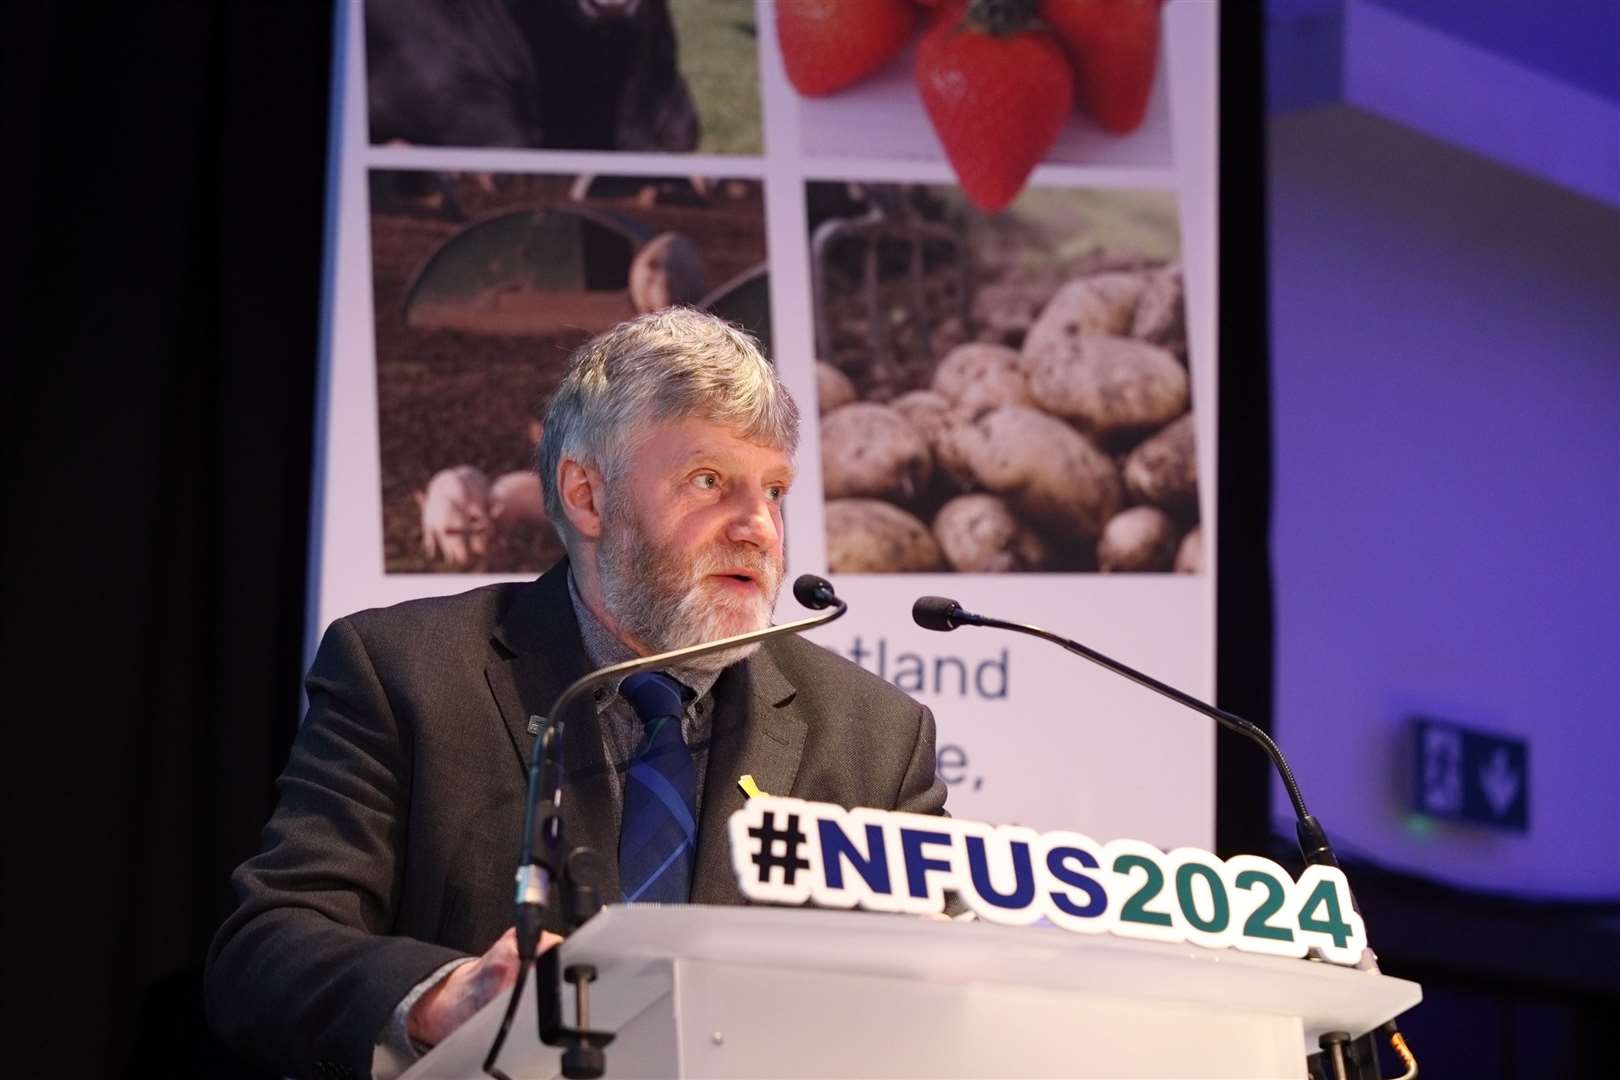 NFU Scotland president Martin Kennedy: 'What we cannot risk losing is consumer confidence and support for farmers.'